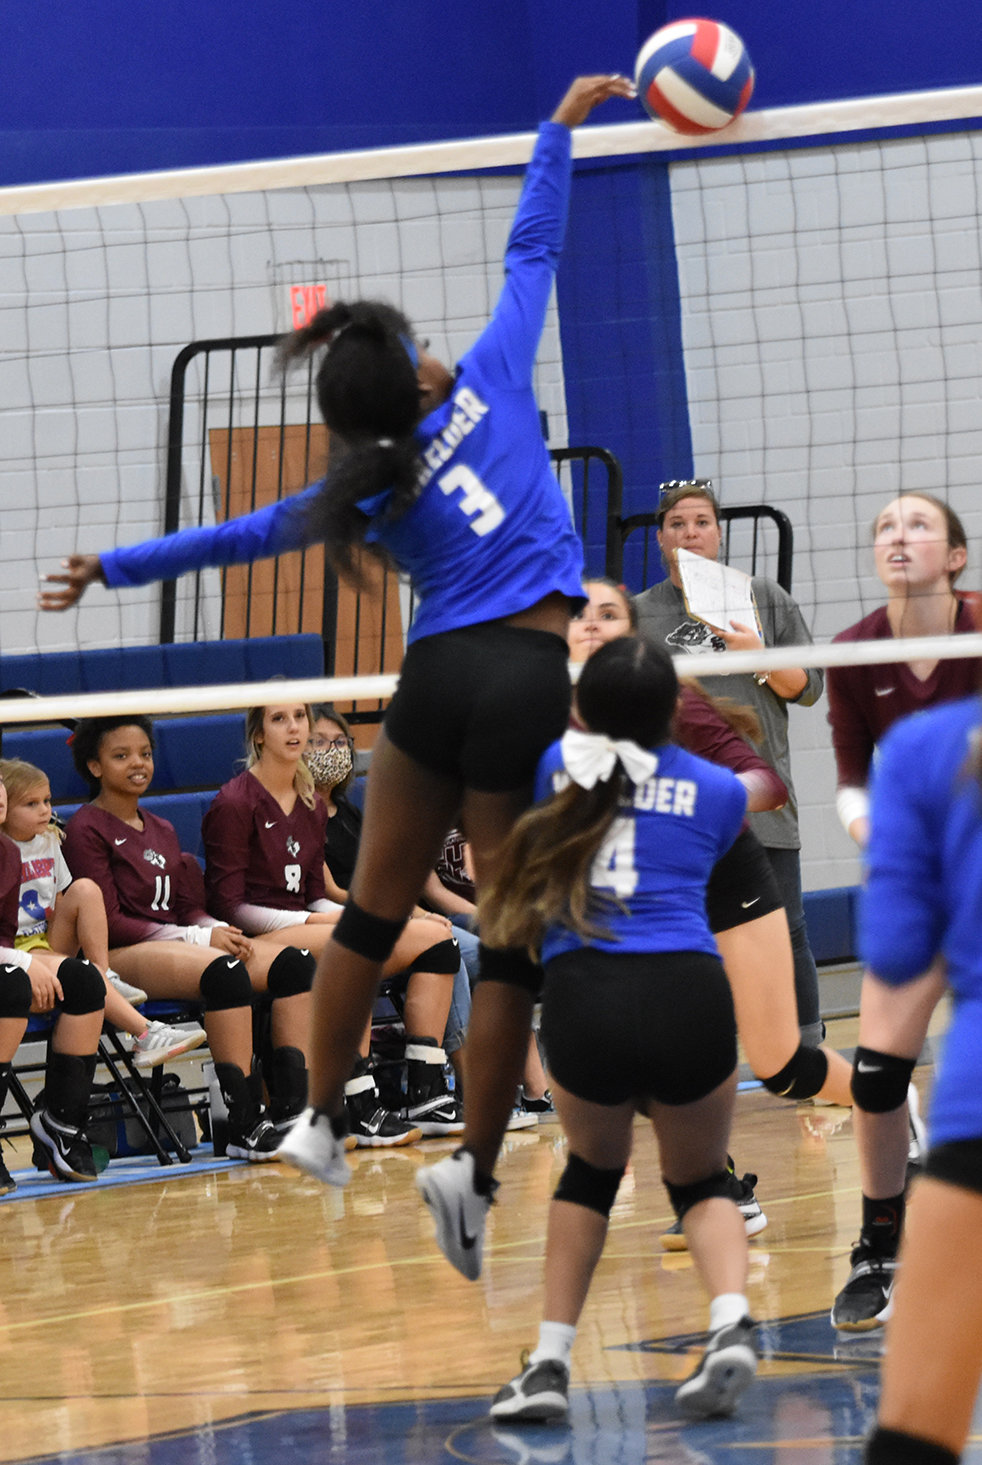 The Waelder High School volleyball team closed out the regular season with losses to Flatonia on Friday, Oct. 22 and Shiner on Tuesday, Oct. 26. Jahlissia Thompson attempts to tip the ball over the net against Flatonia. The Wildcats will head to the 1A playoffs against Runge.